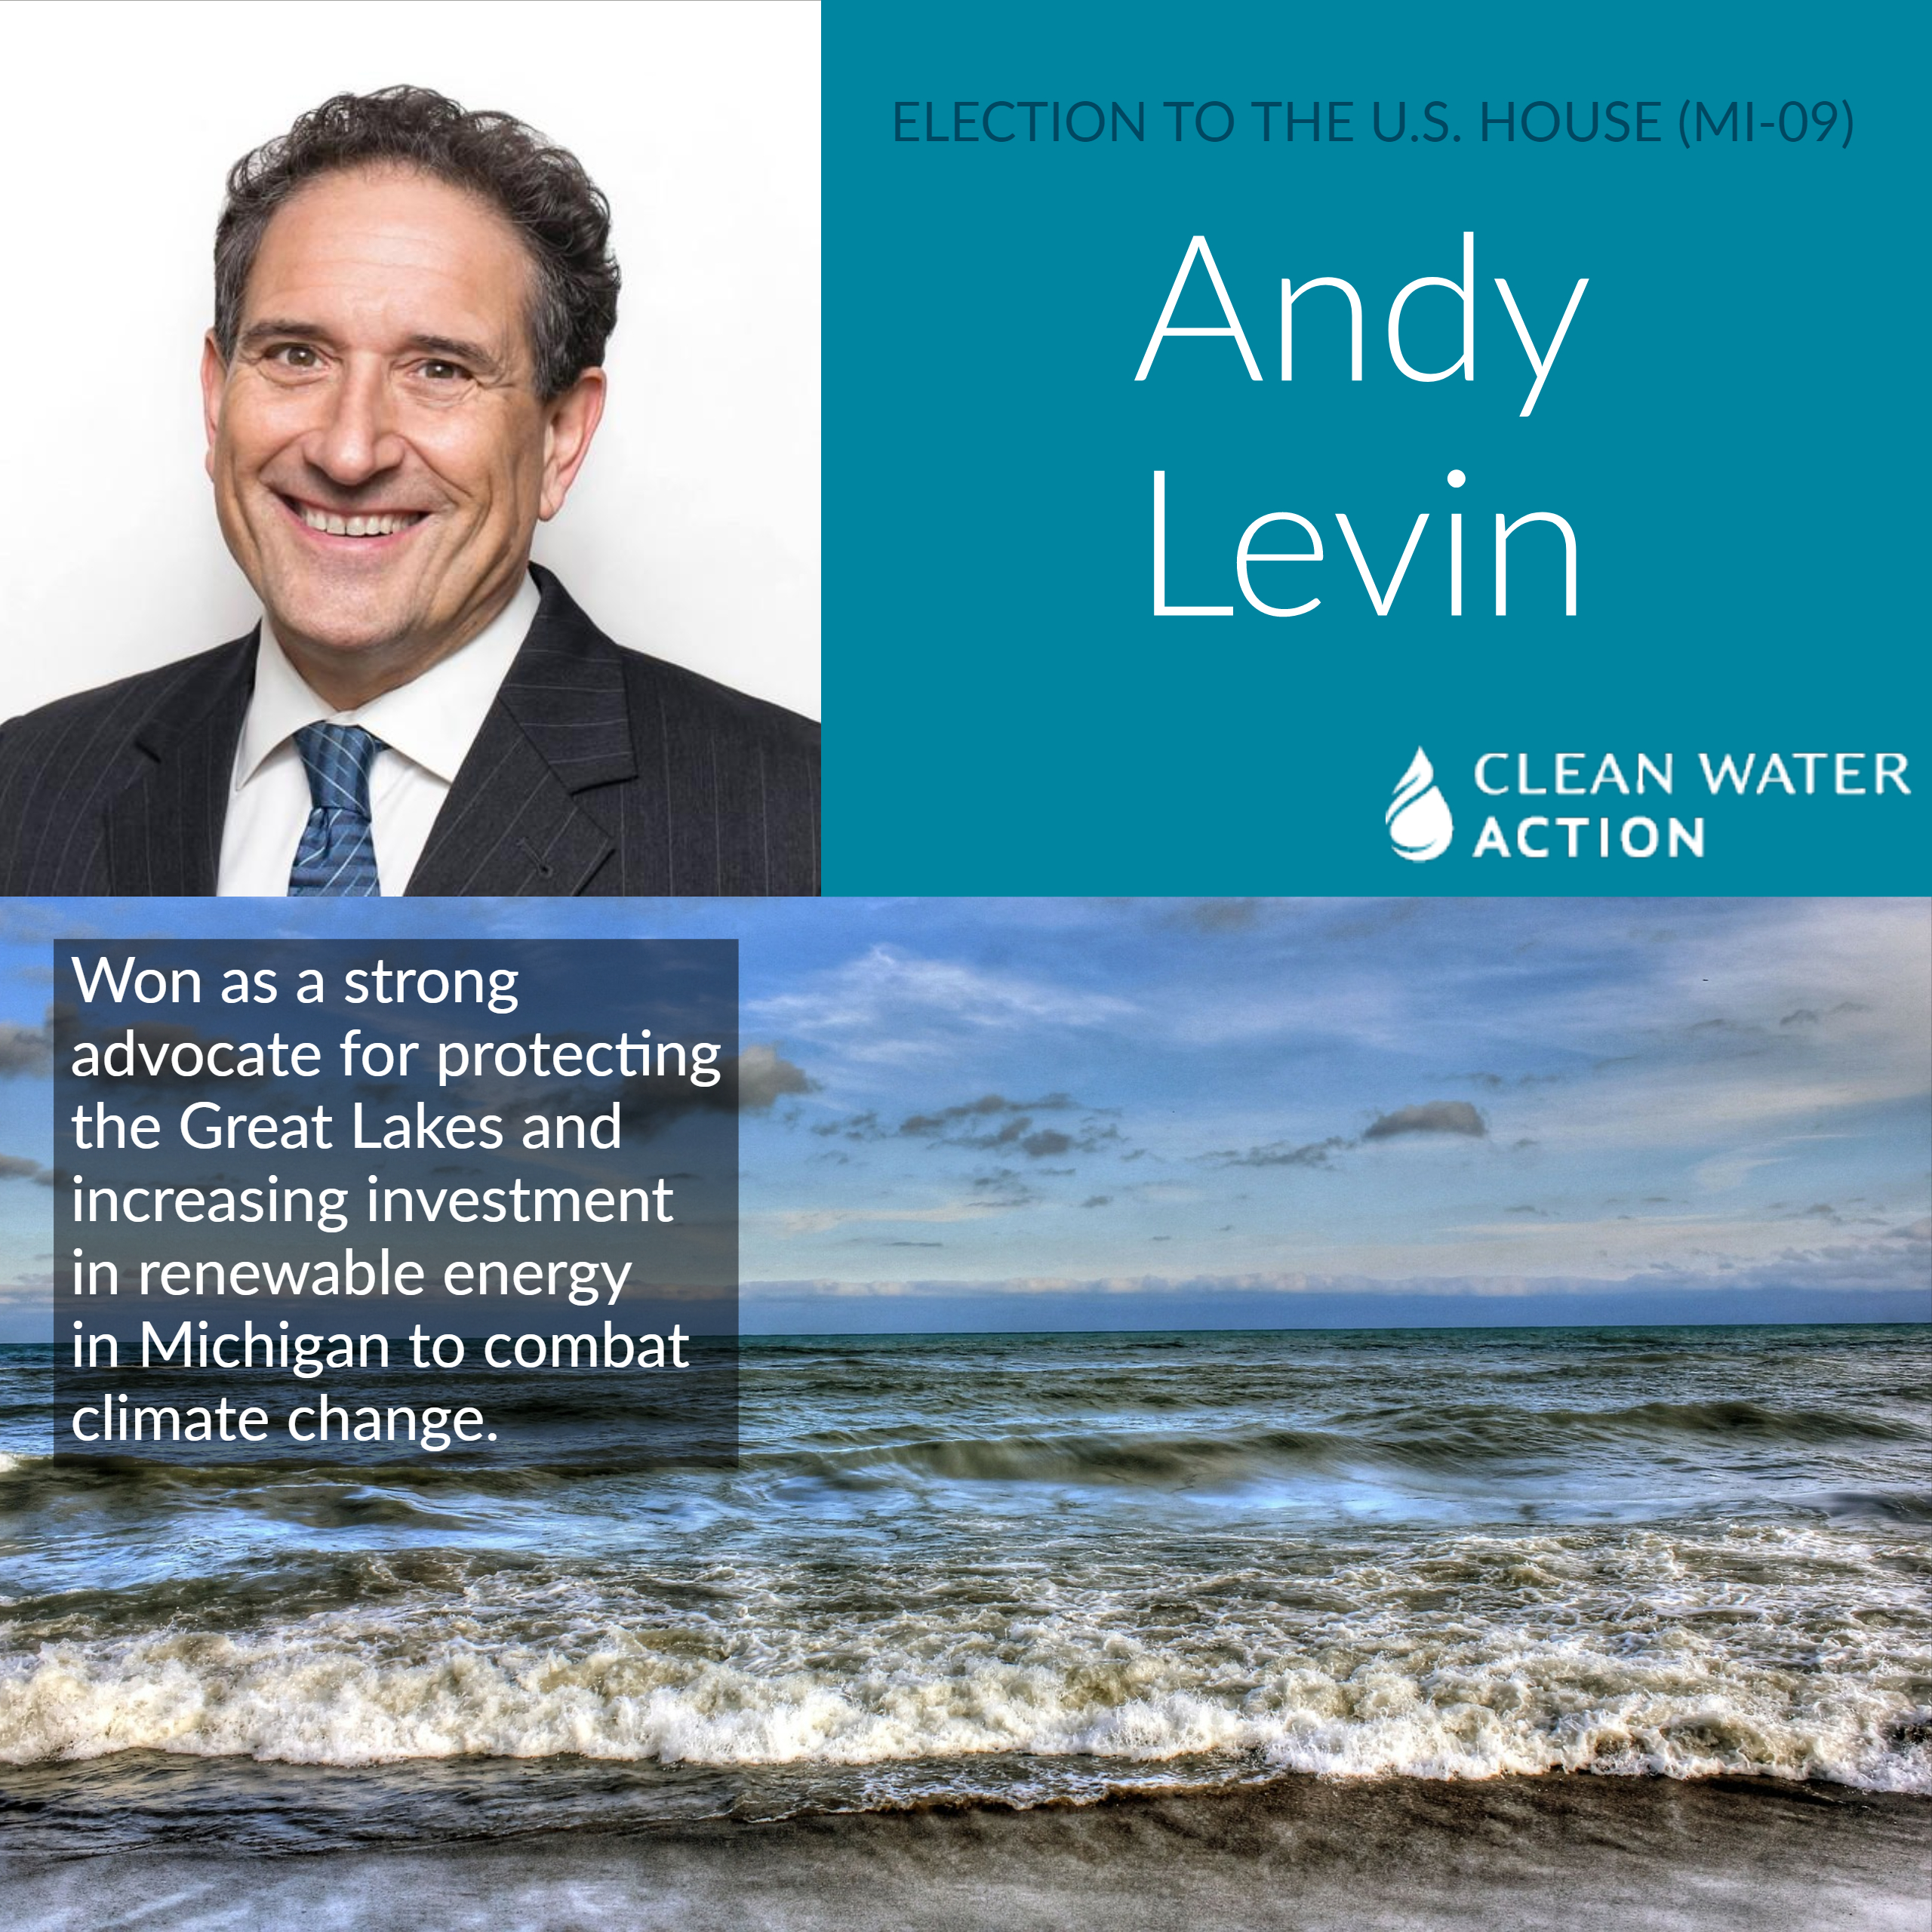 Andy Levin